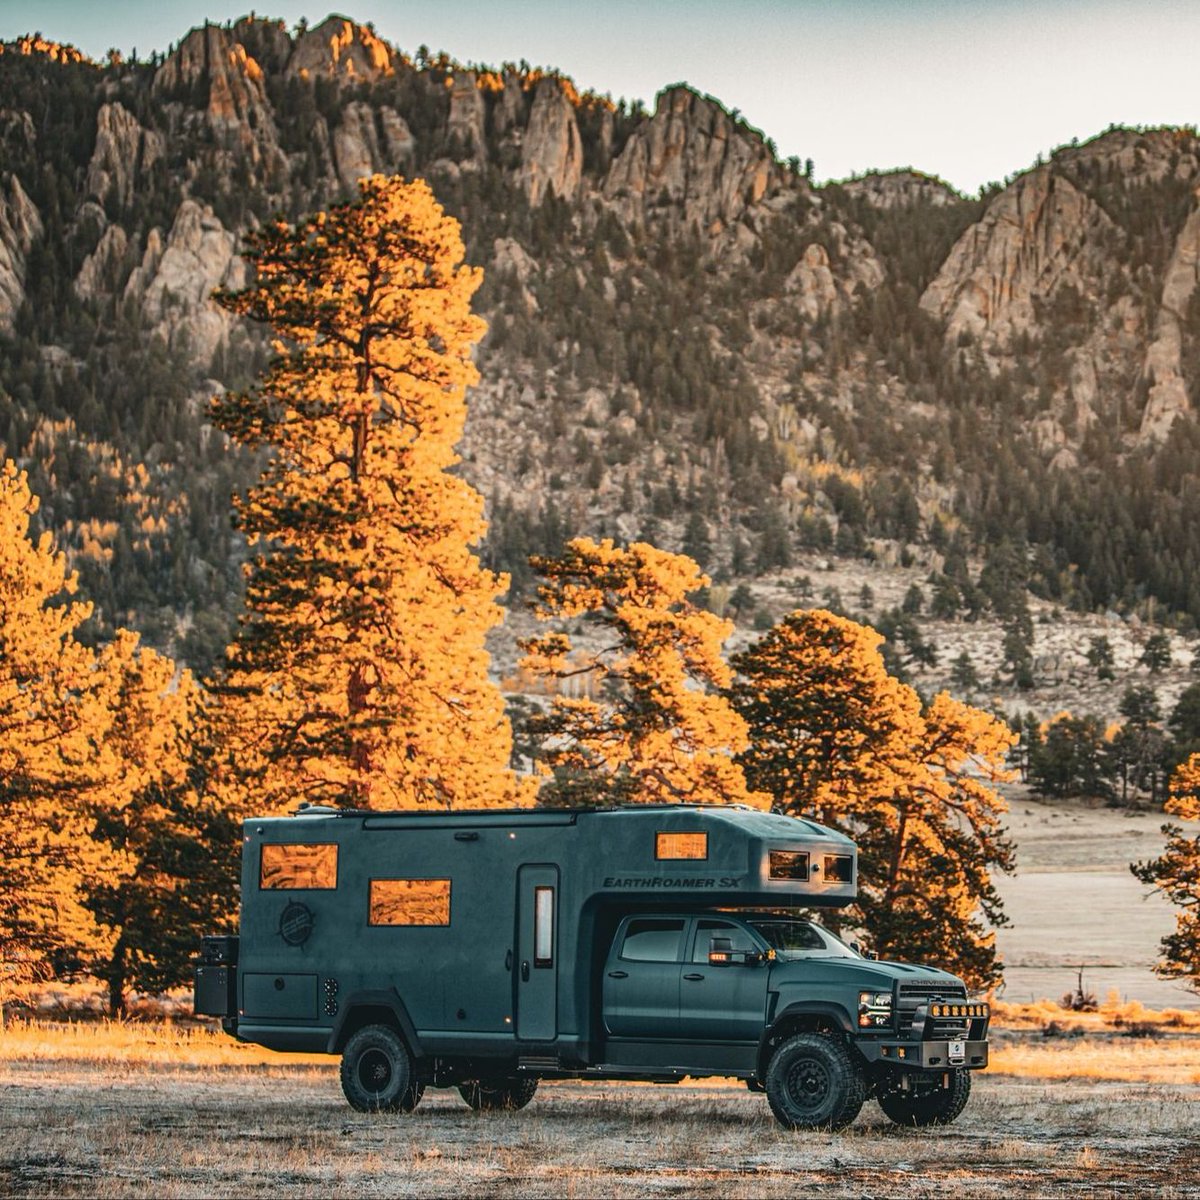 Bask in the beauty of nature as you roam freely in your EarthRoamer. Where will the road take you next? 🗺️✨ · · · #earthroamer #offroad4x4 #expeditionvehicle #campinglife #overlanding #4x4life #4x4trucks #vanlife #vanlifeadventures